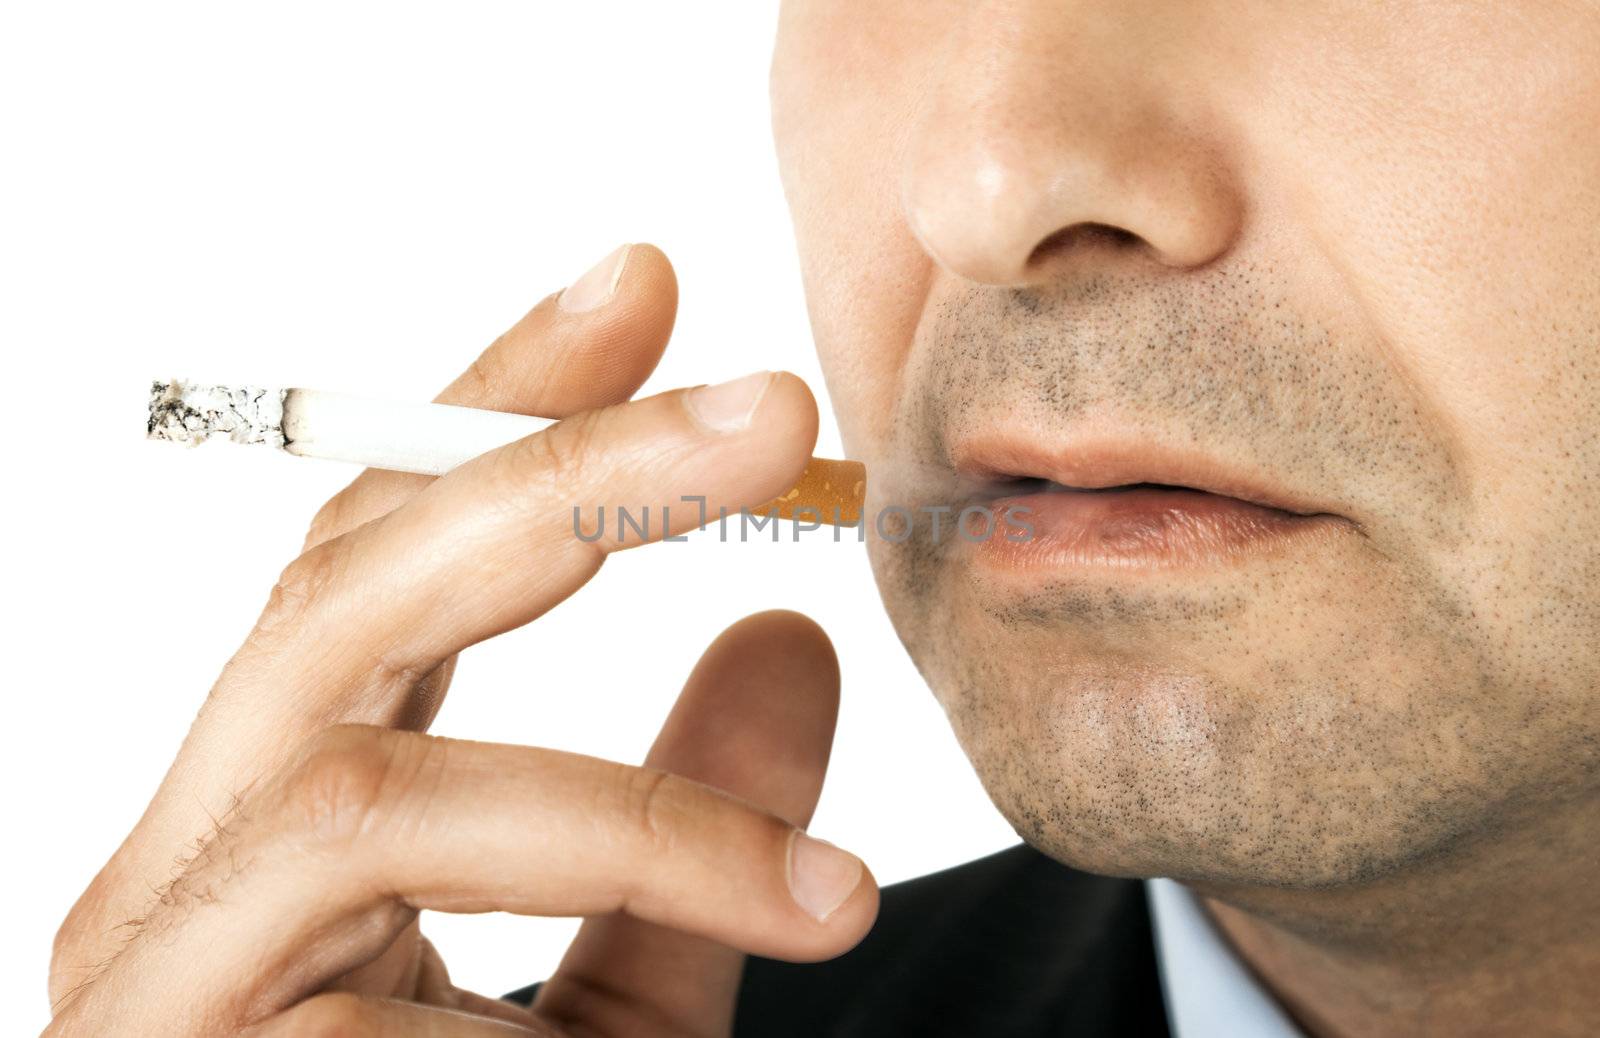 Cropped image of man holding cigarette in his hand, close-up on it and mouth